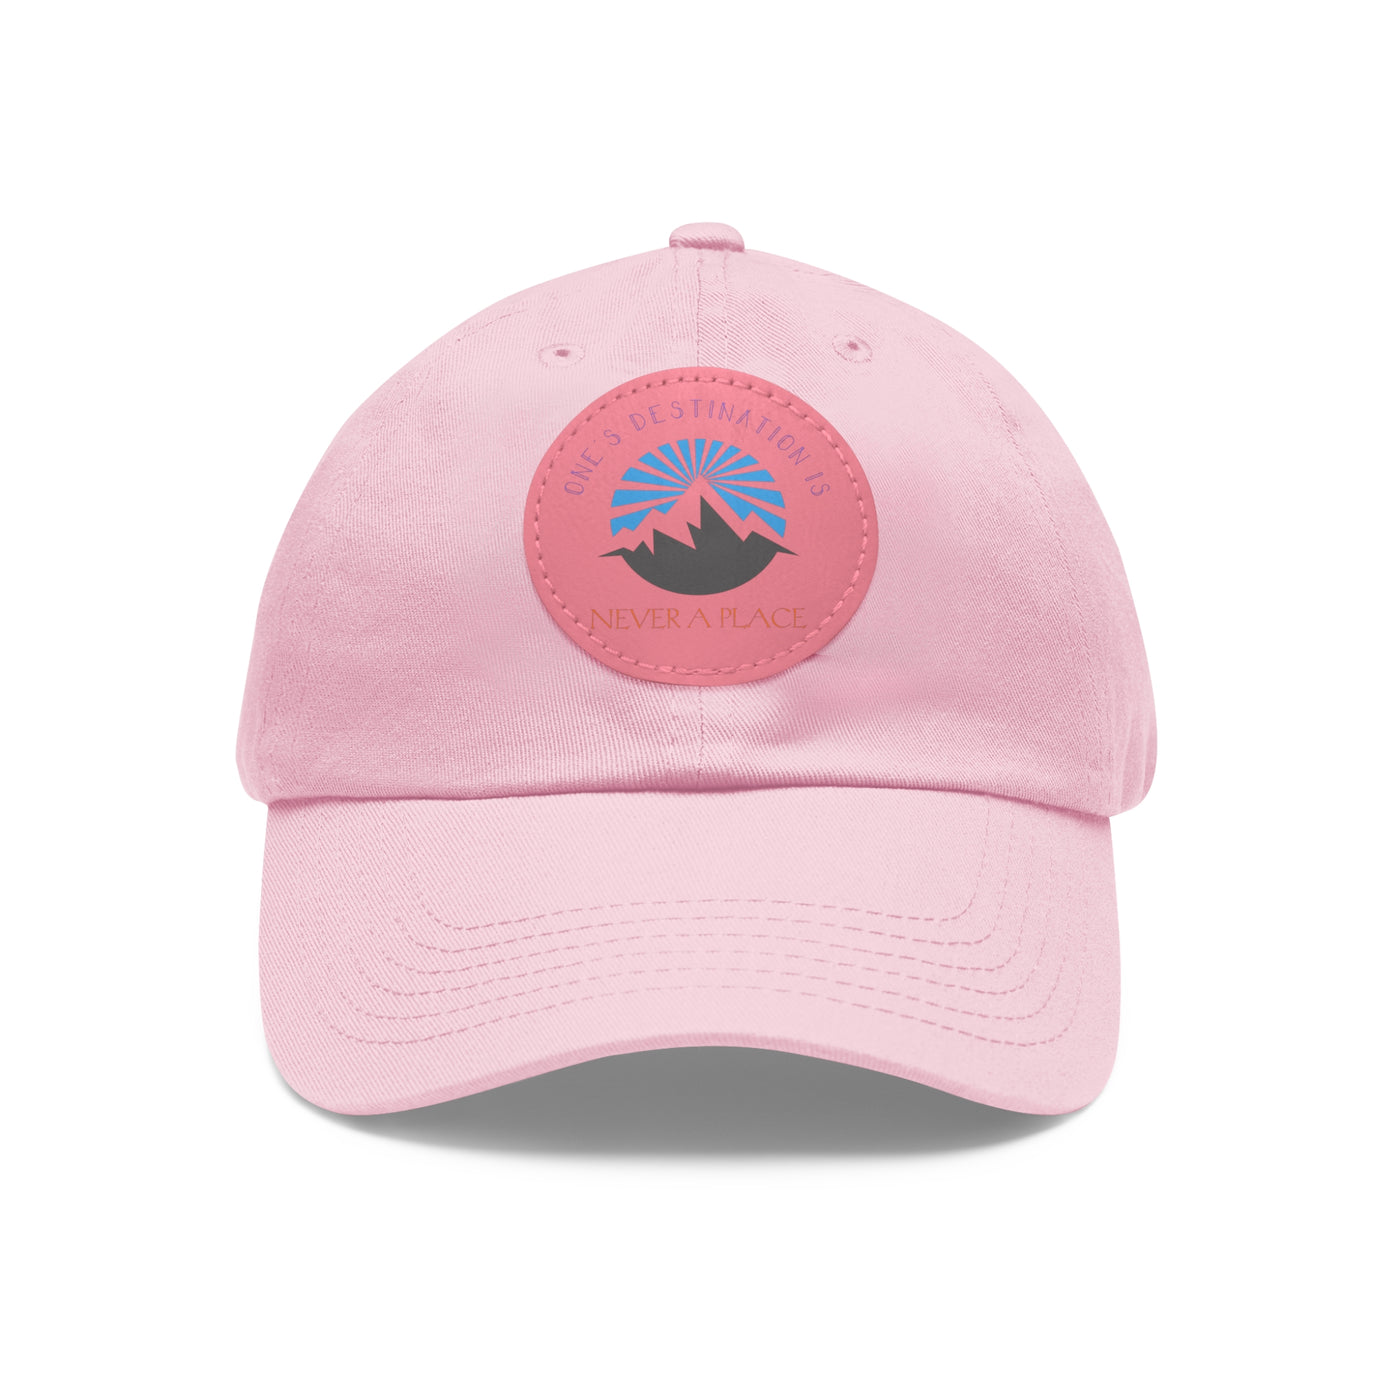 Men's Dad Hats | Round Leather Patch Hat | Let's Travel